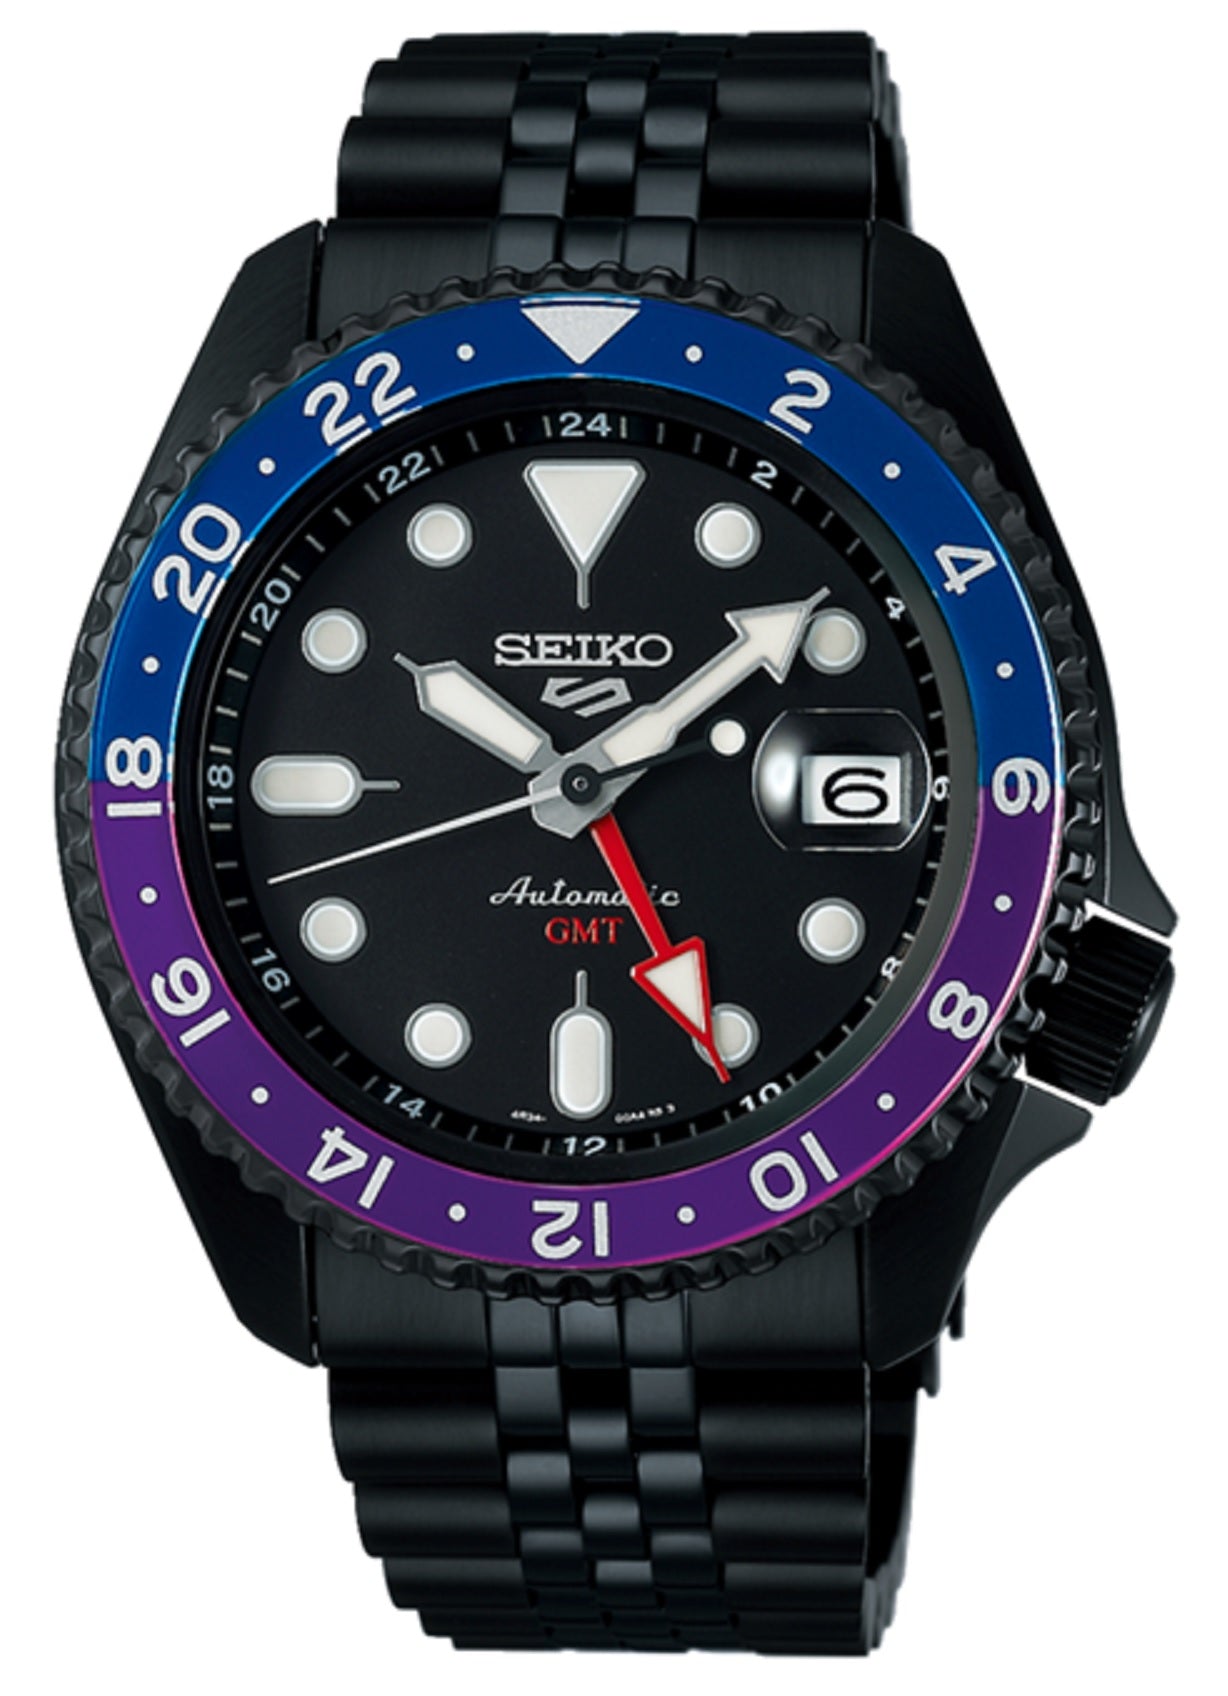 Seiko 5 Sports SSK027K1 Yuto Horigome Limited Ed Automatic Watch for Men-Watch Portal Philippines